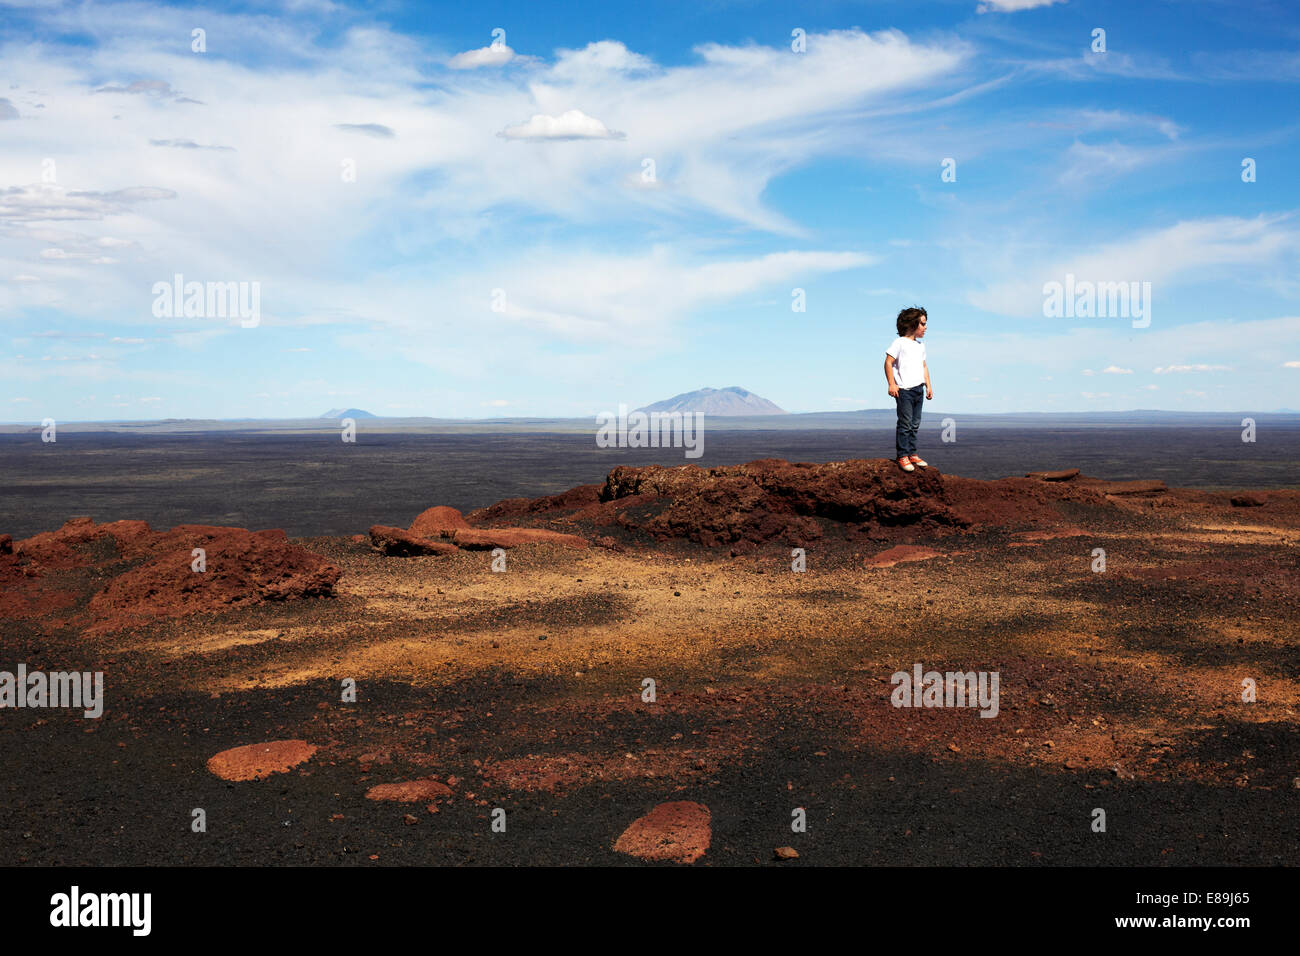 Boy Standing on rocks at Craters of The Moon Stock Photo